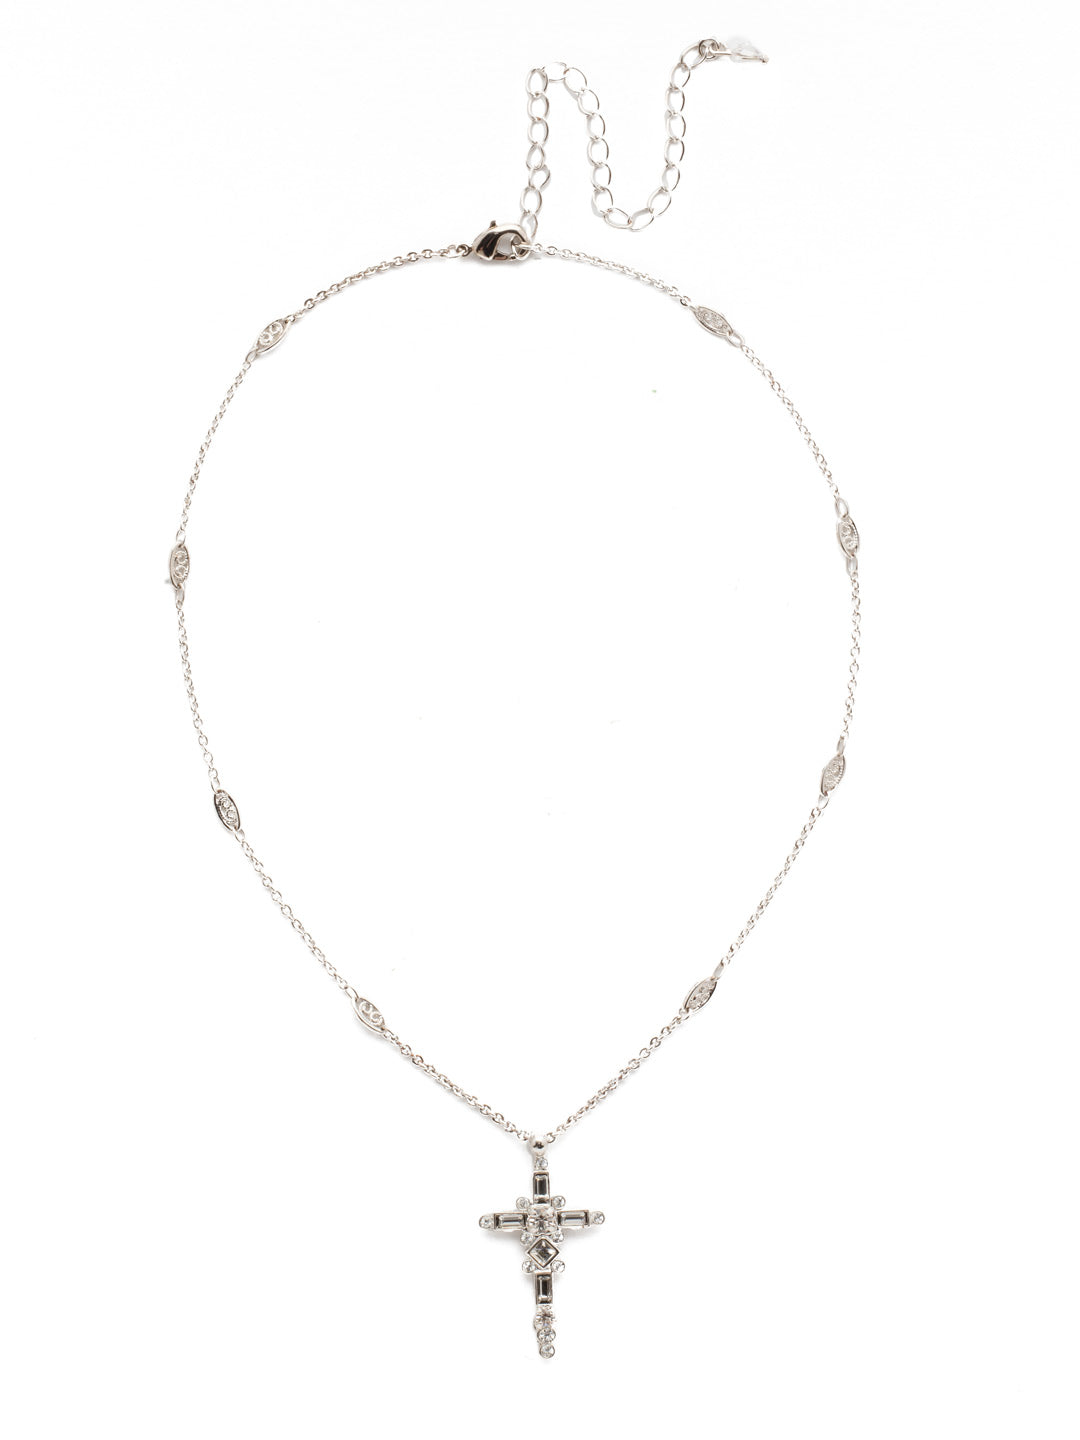 Dierdre Cross Pendant Necklace - NDQ54RHCRY - <p>A truly divine pendant. This delicate cross necklace features multi-cut crystals in an antique inspired setting. This crystal cross necklace offers movement on the chain for ease of wear. From Sorrelli's Crystal collection in our Palladium Silver-tone finish.</p>